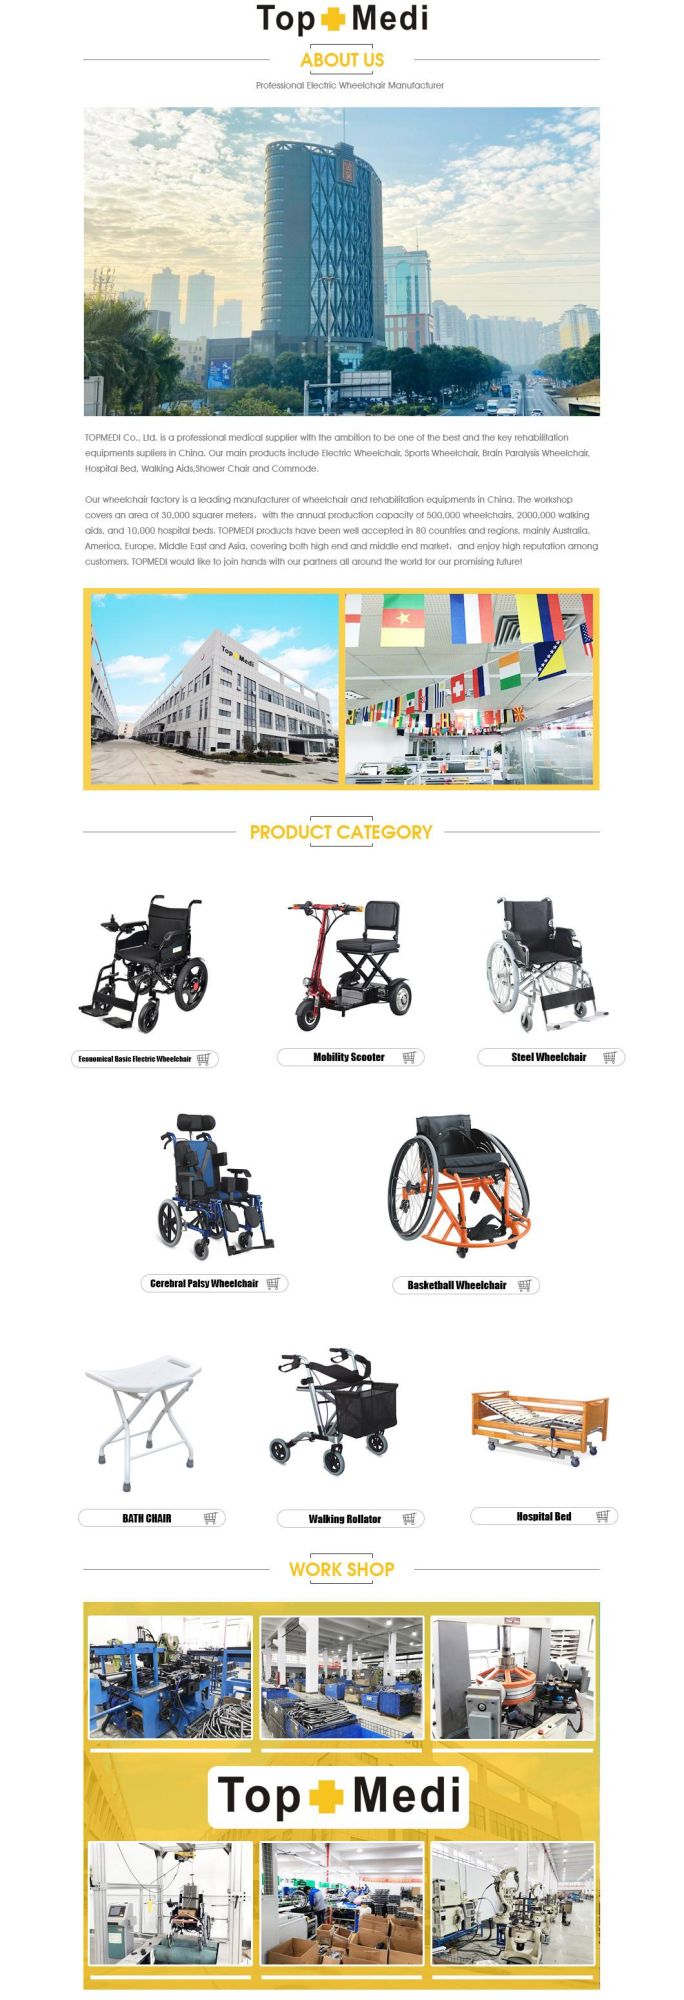 Heavy Duty Handicapped Equipment Outdoor Powered Motorized Folding Electric Wheelchair